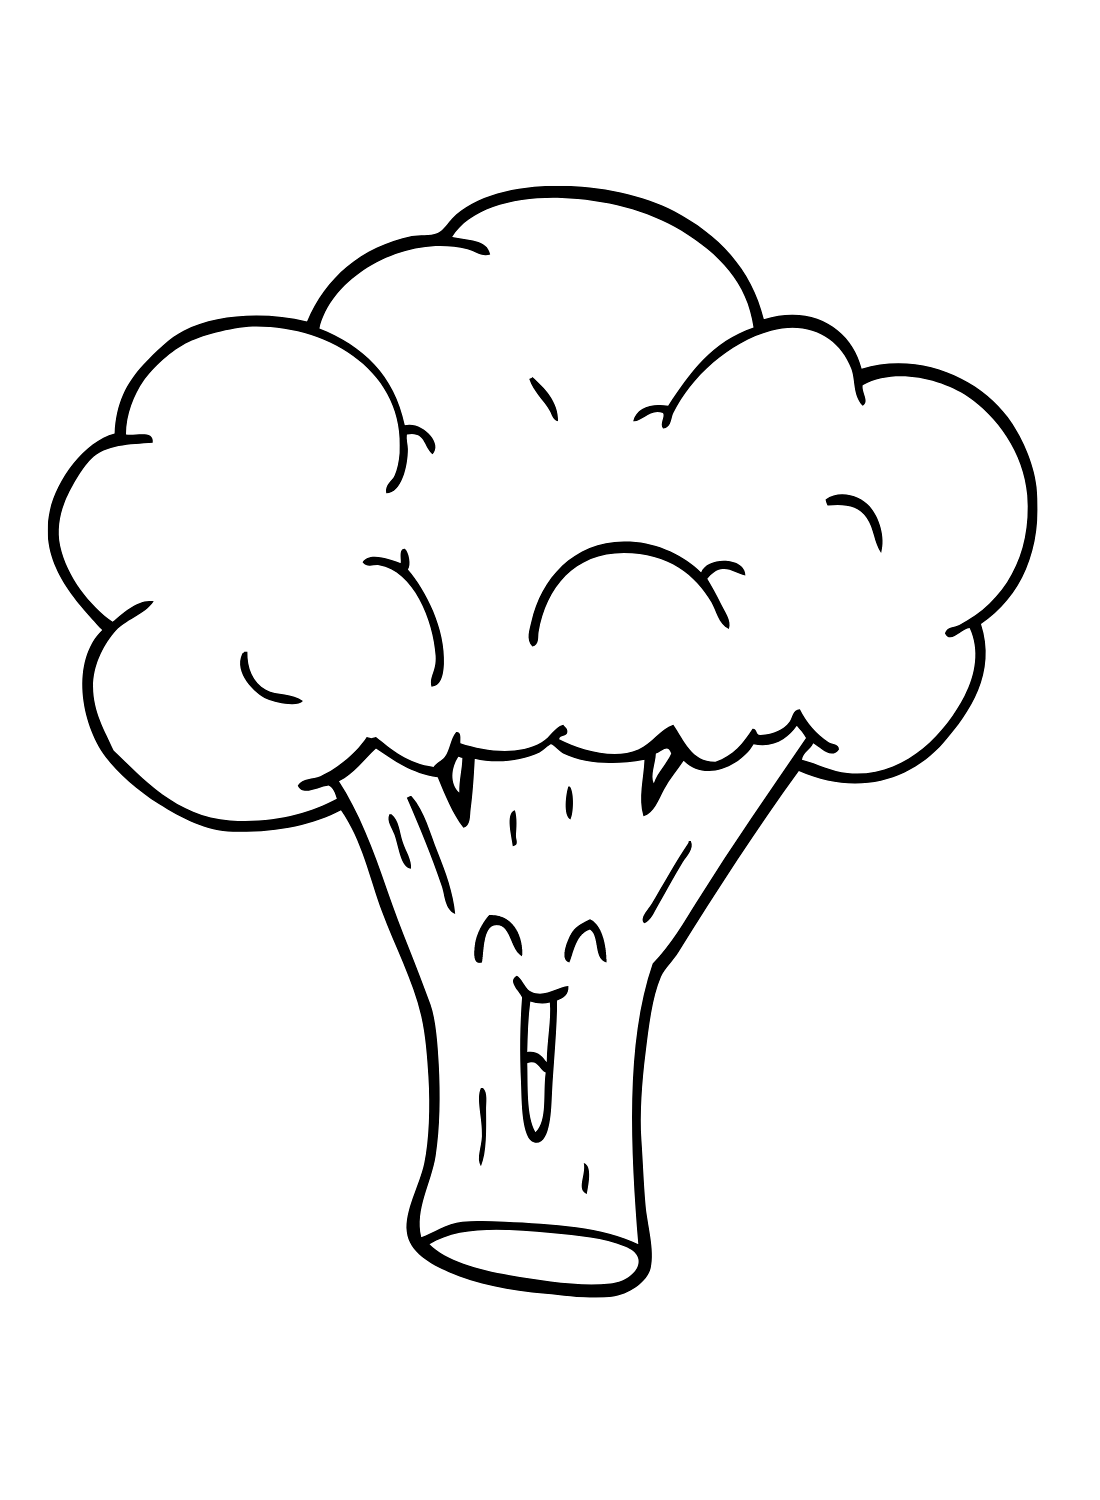 Broccoli Cartoon Images Coloring Pages